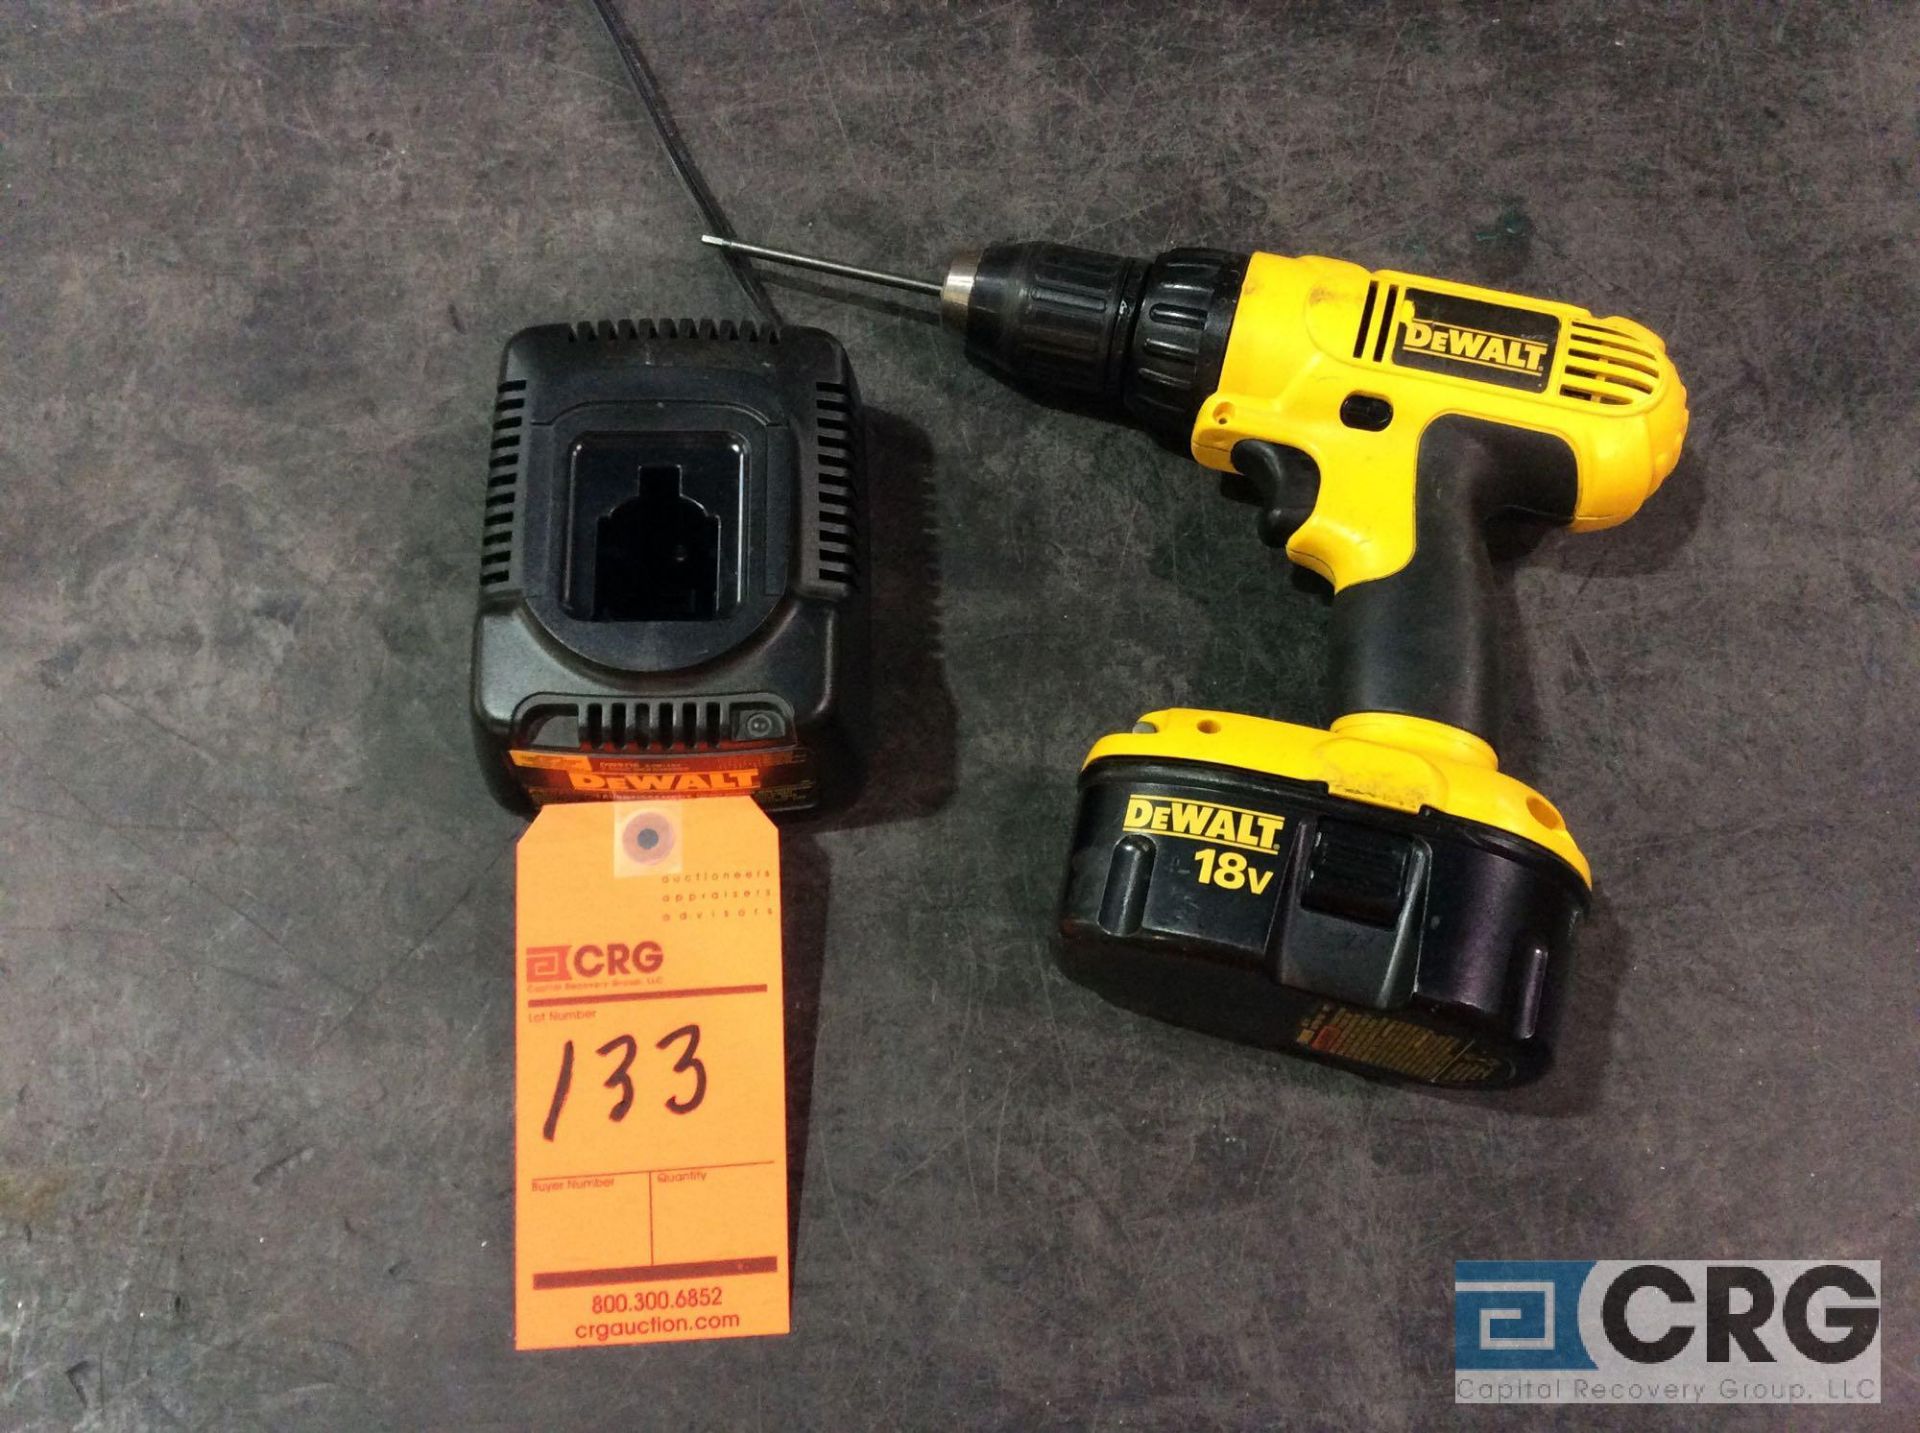 DeWalt DC759 18V 1/2 inch vari-speed cordless drill / driver with charger